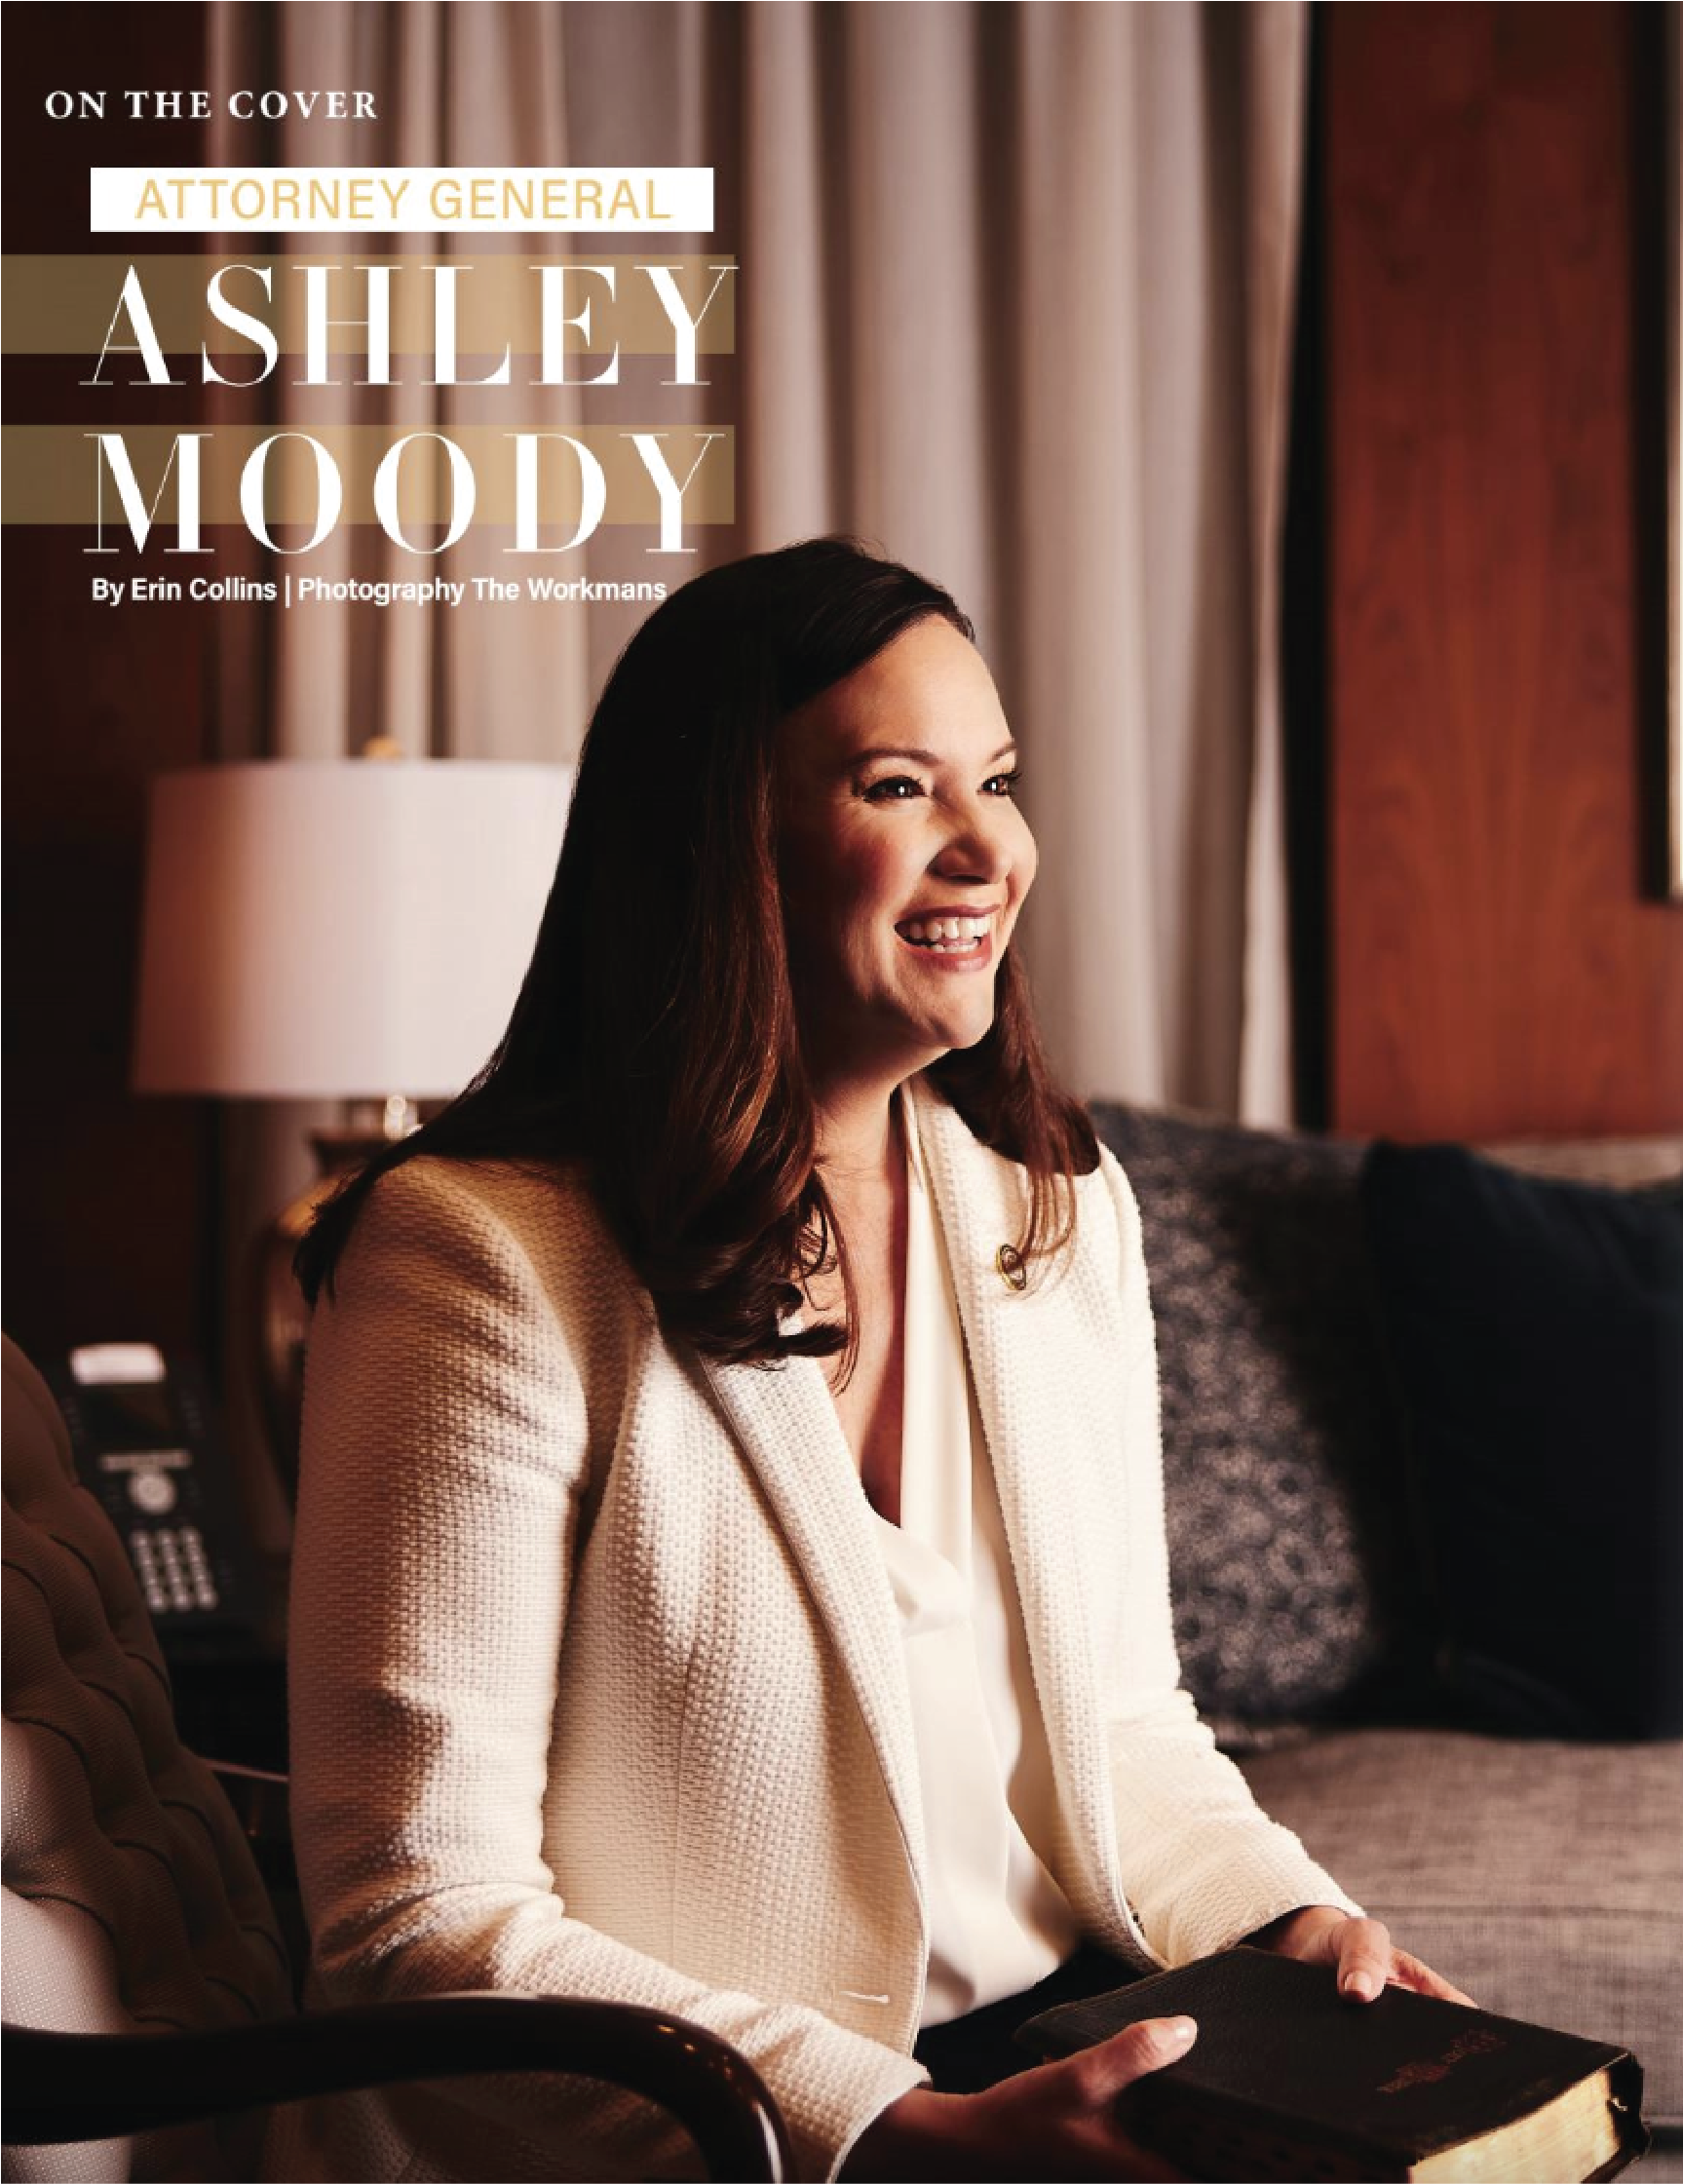 Attorney General Ashley Moody-02.png